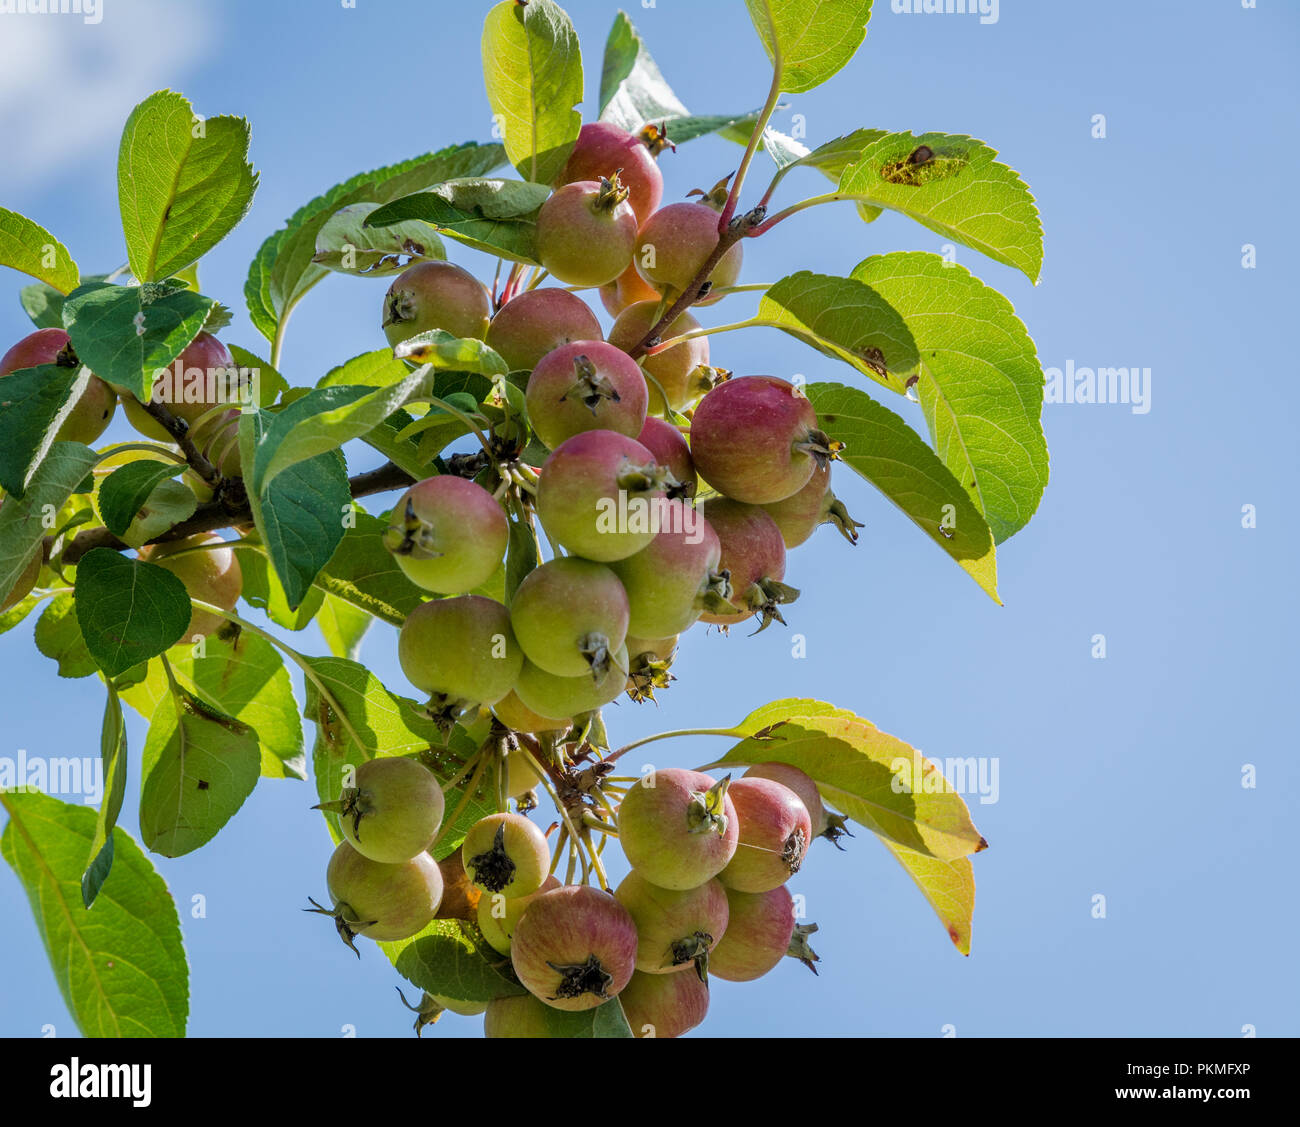 Wild apple branch. Malus sylvestris esemplar. Close-up showing fruit and leaves.European crab apple Stock Photo